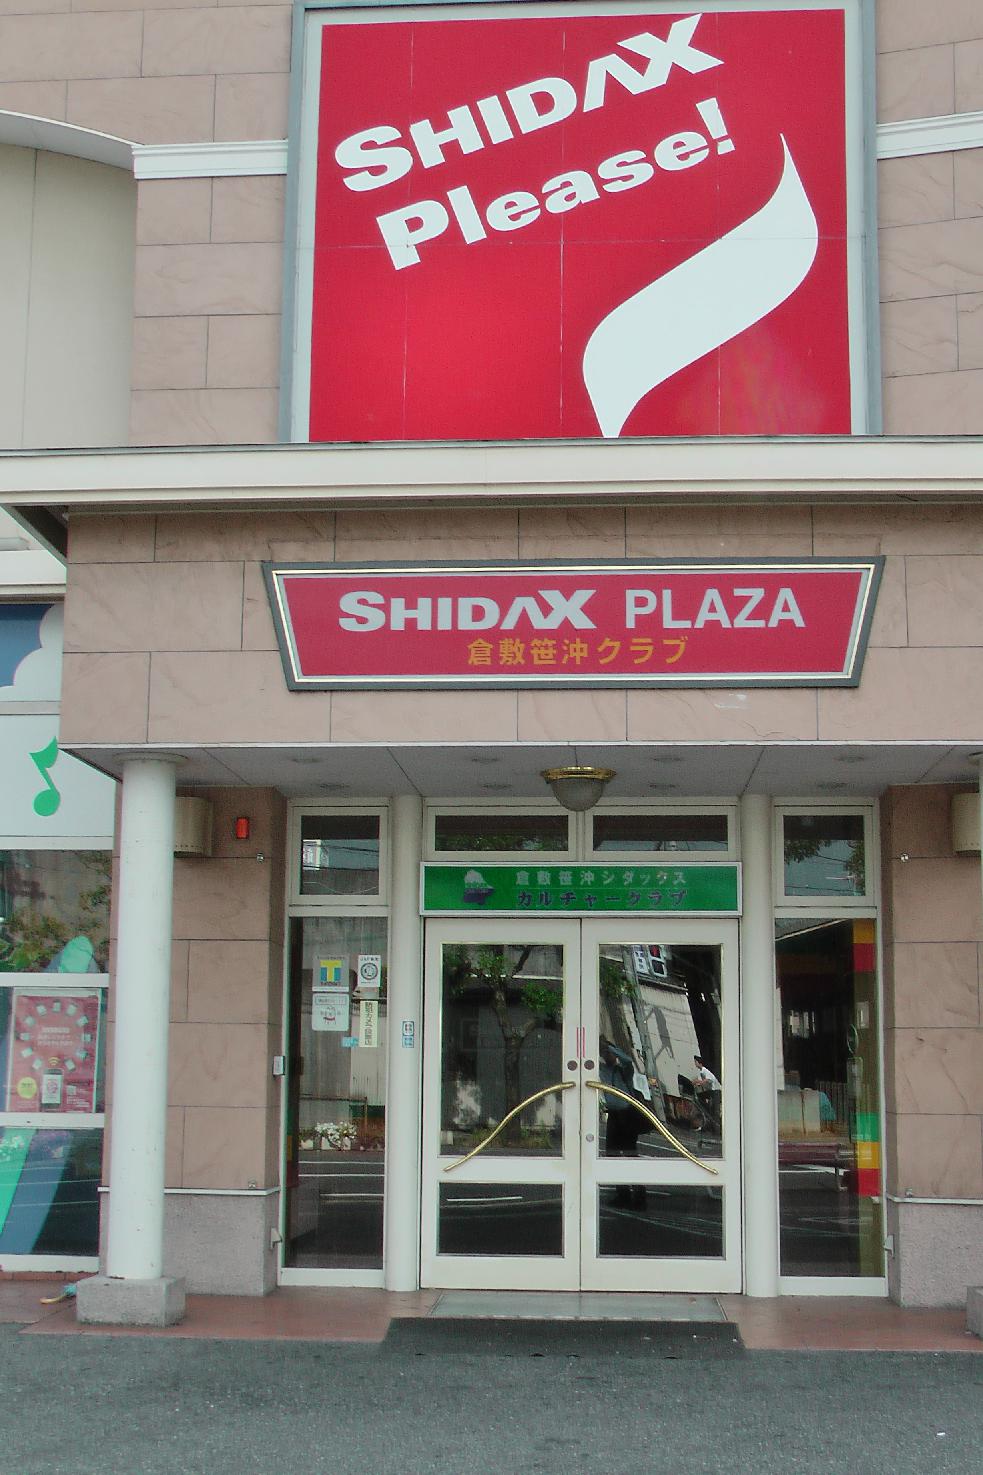 I don't know what "to Shidax" is or means. But I find it coo. So everybody shidax please!